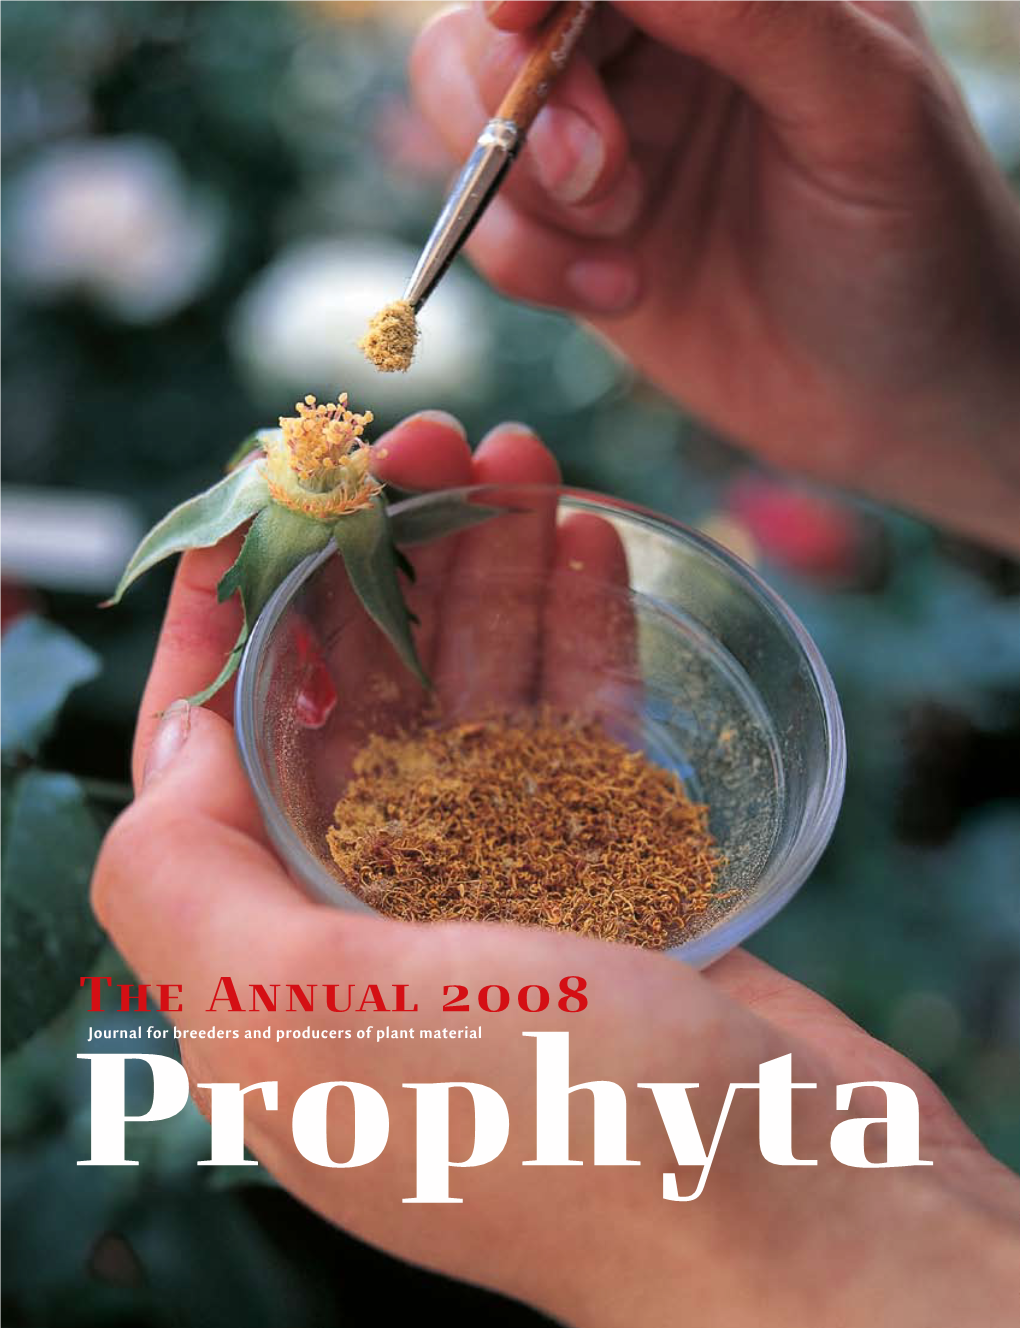 The Annual 2008 Journal for Breeders and Producers of Plant Material XXXEJTUFMOM